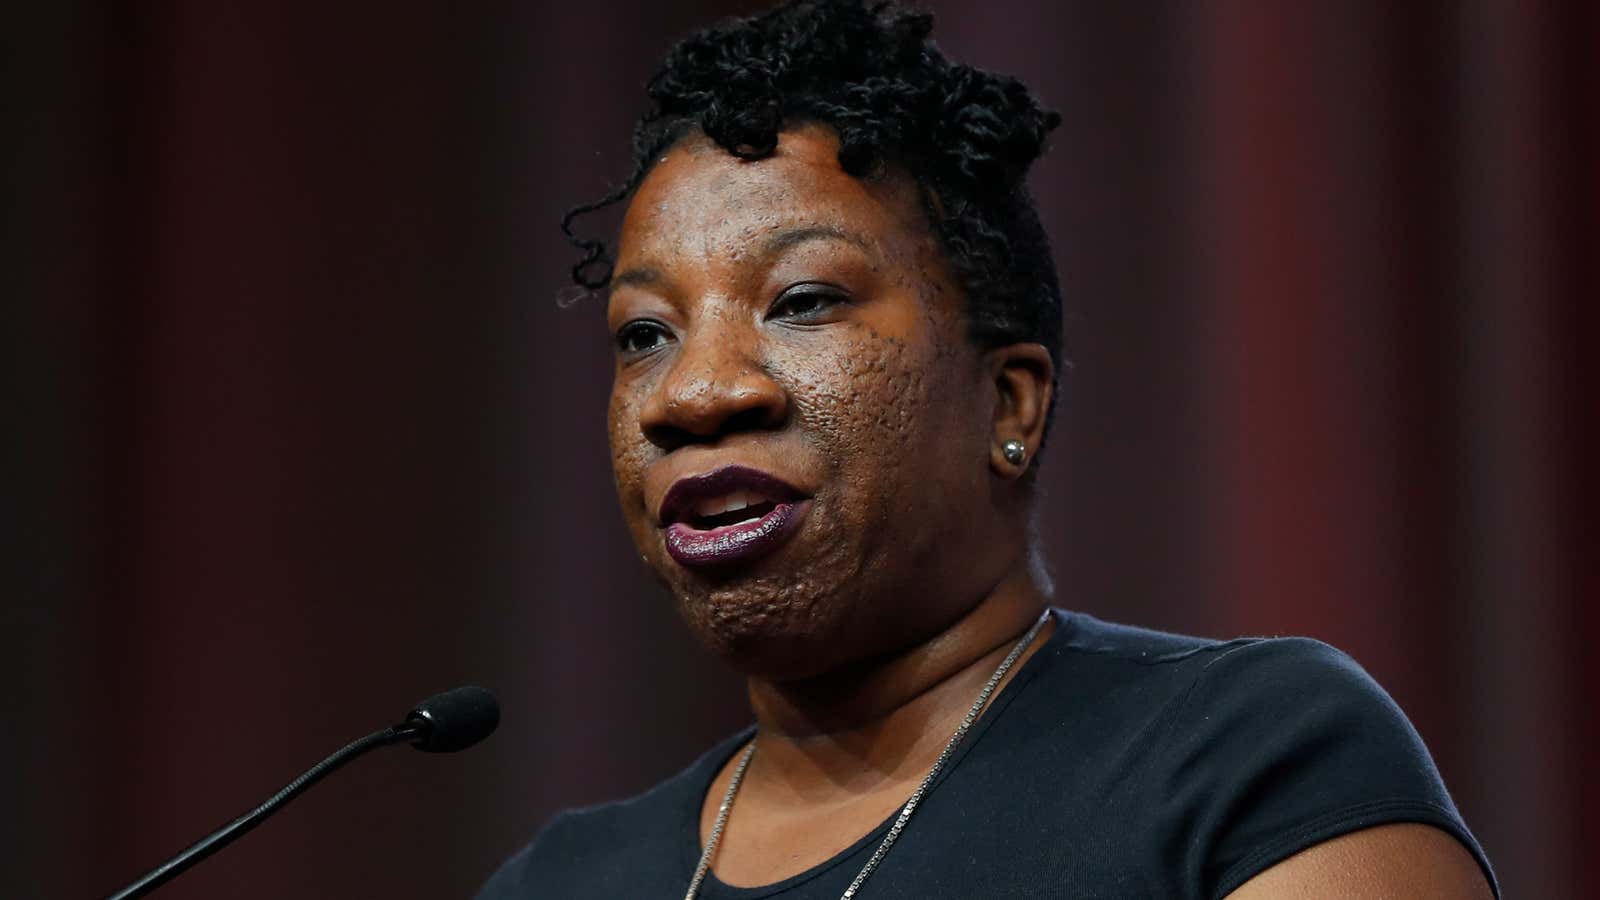 Tarana Burke, creator of Me Too, believes you don’t have to sacrifice everything for a cause